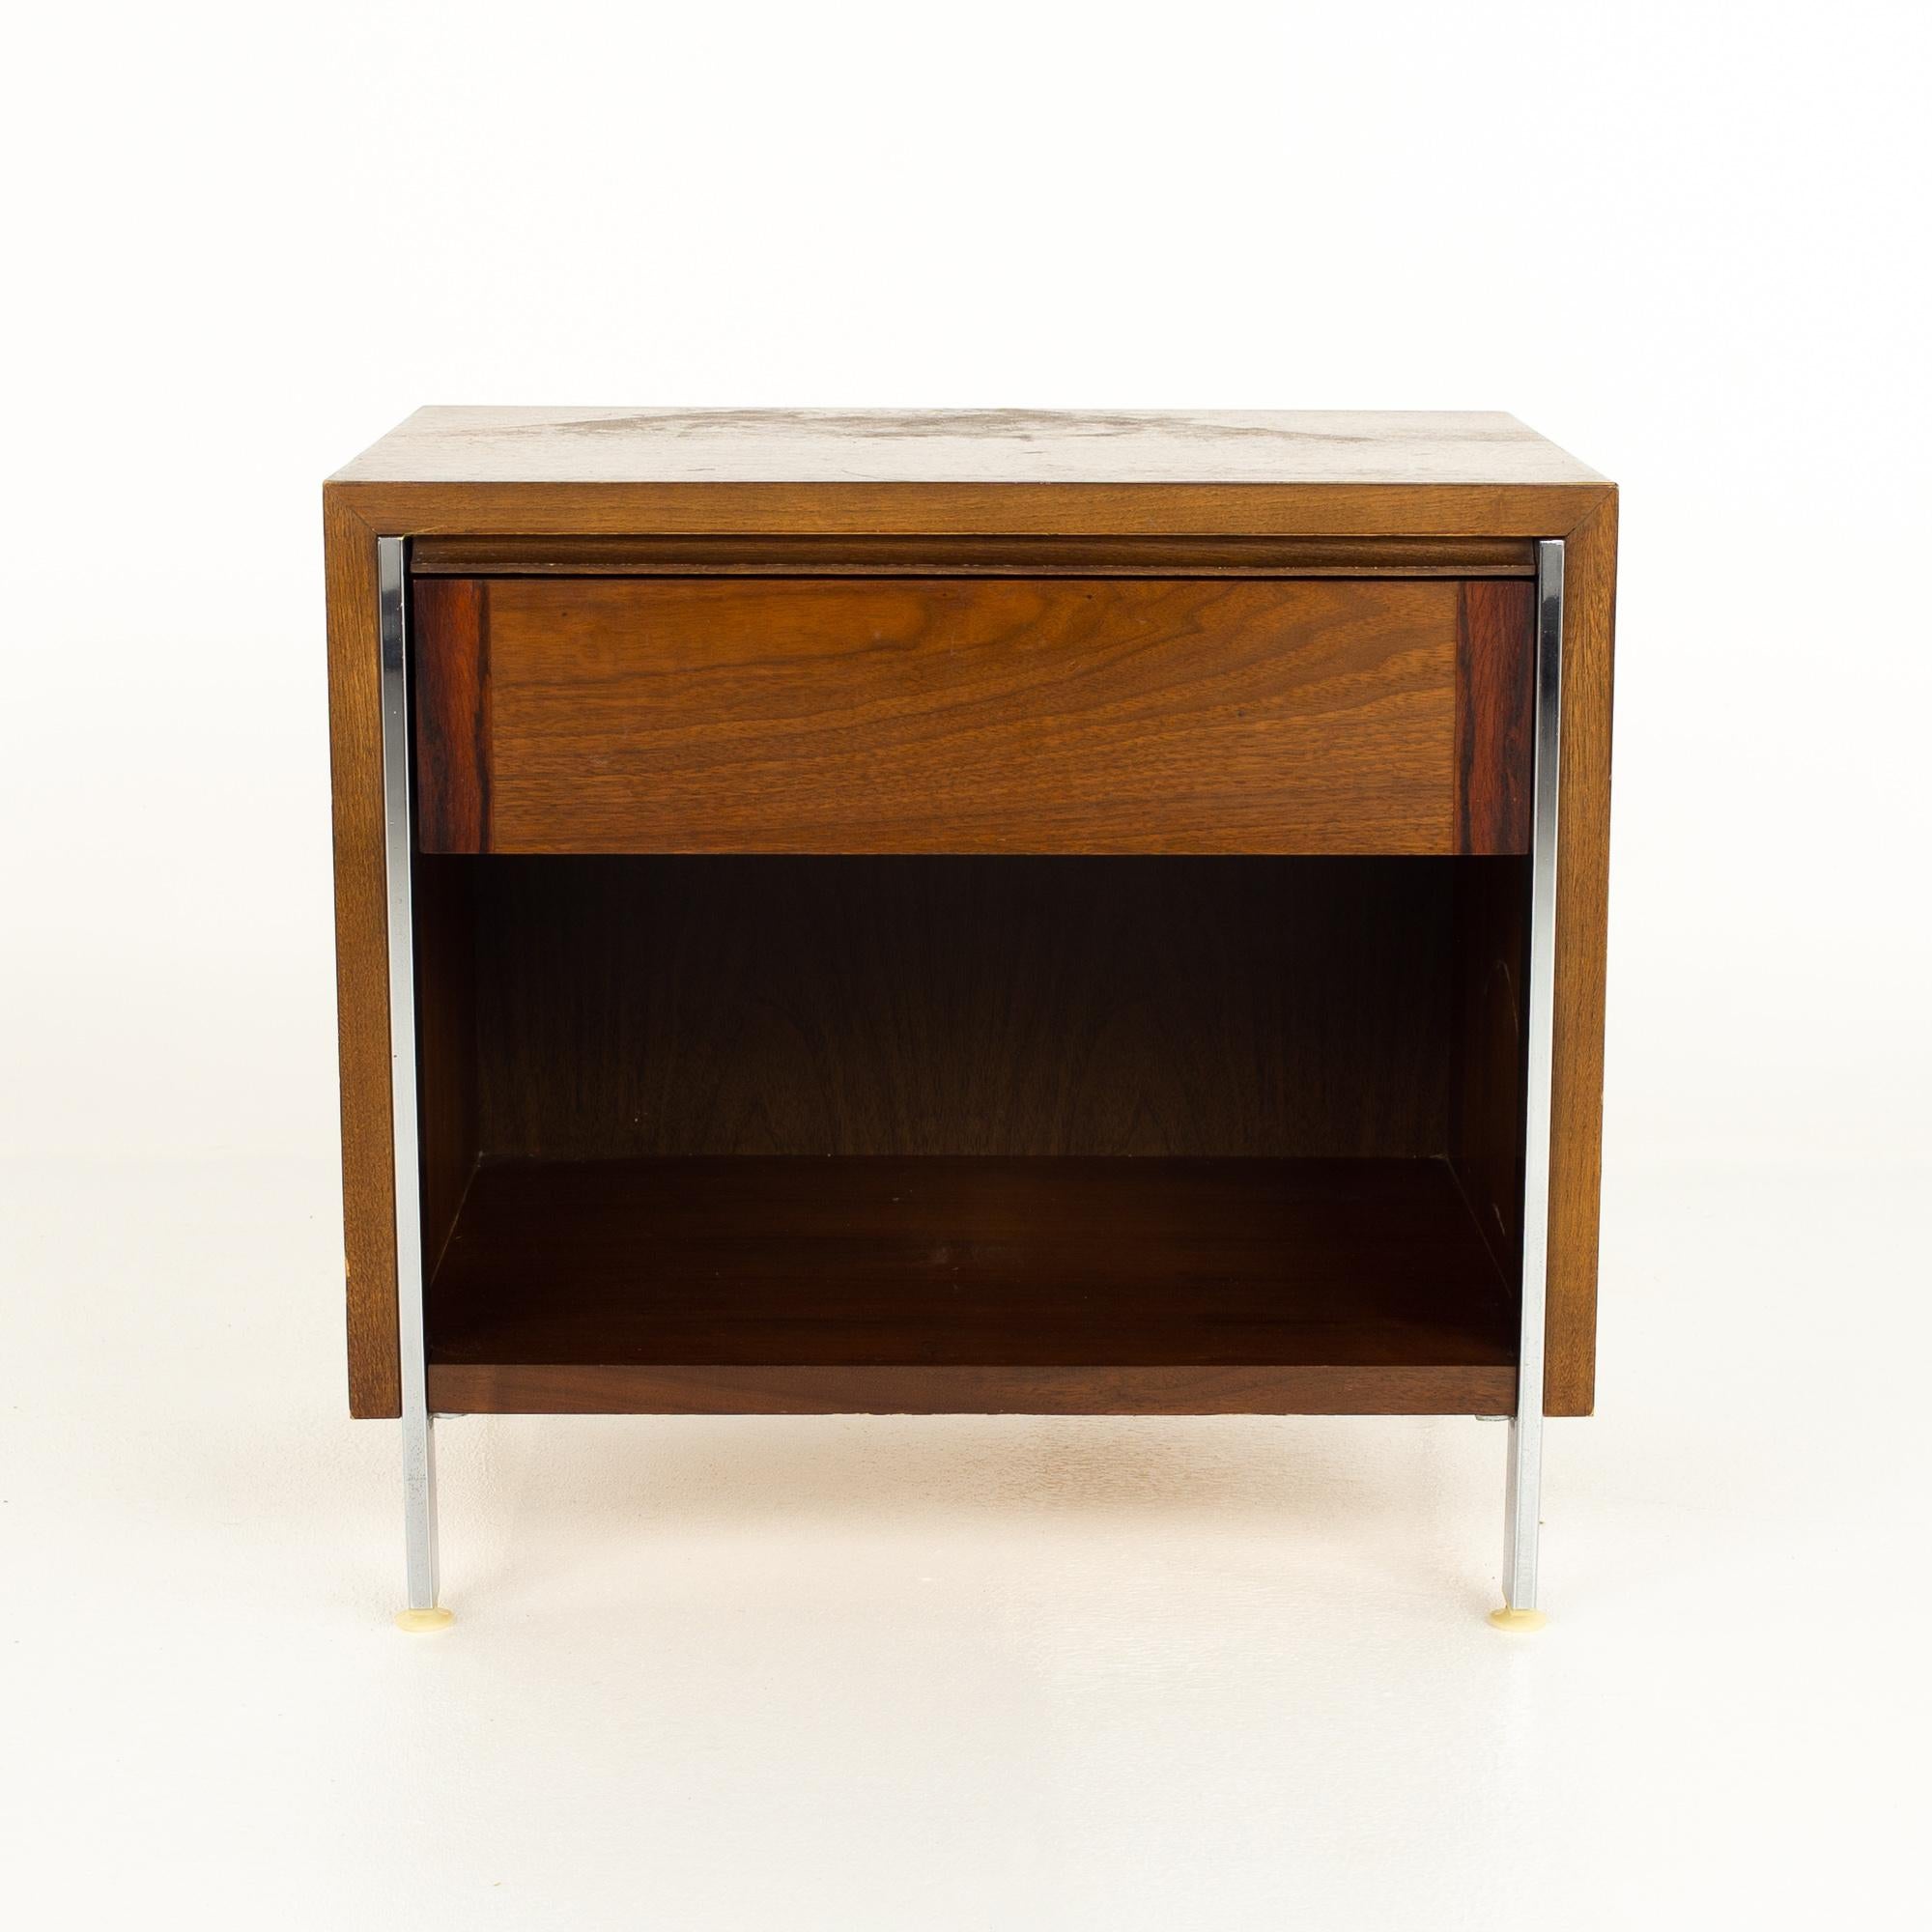 Paul McCobb Style Lane Mid Century Chrome and Walnut Nightstand

This nightstand measures: 24 wide x 17 deep x 22.5 inches high

All pieces of furniture can be had in what we call restored vintage condition. That means the piece is restored upon